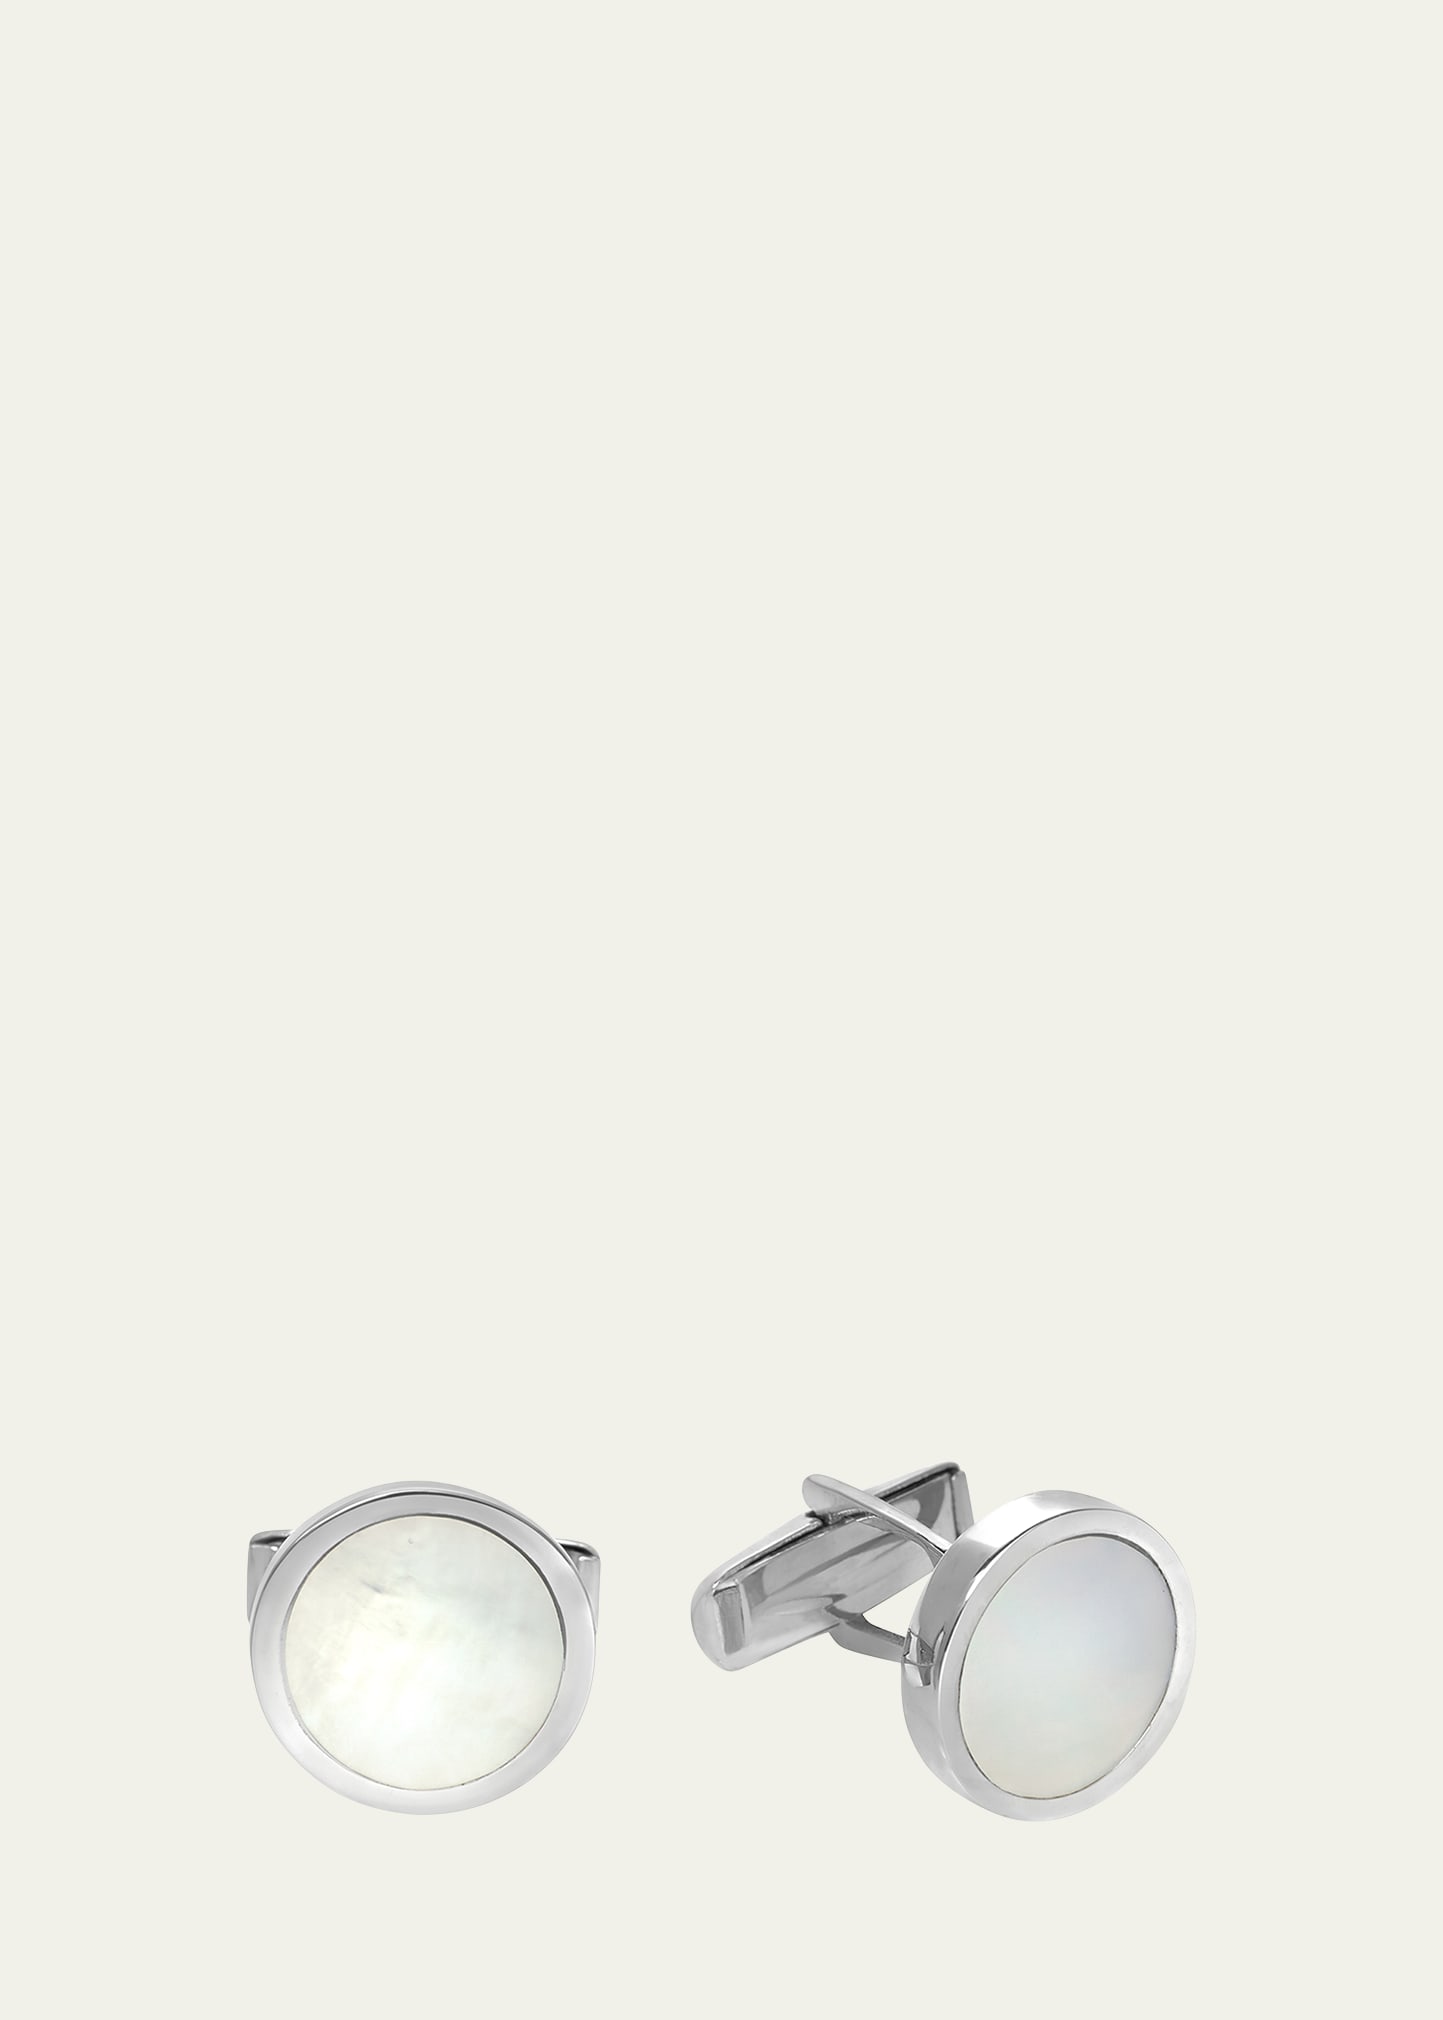 Lindsay & Co Men's 14k White Gold Mother-of-pearl Round Cufflinks